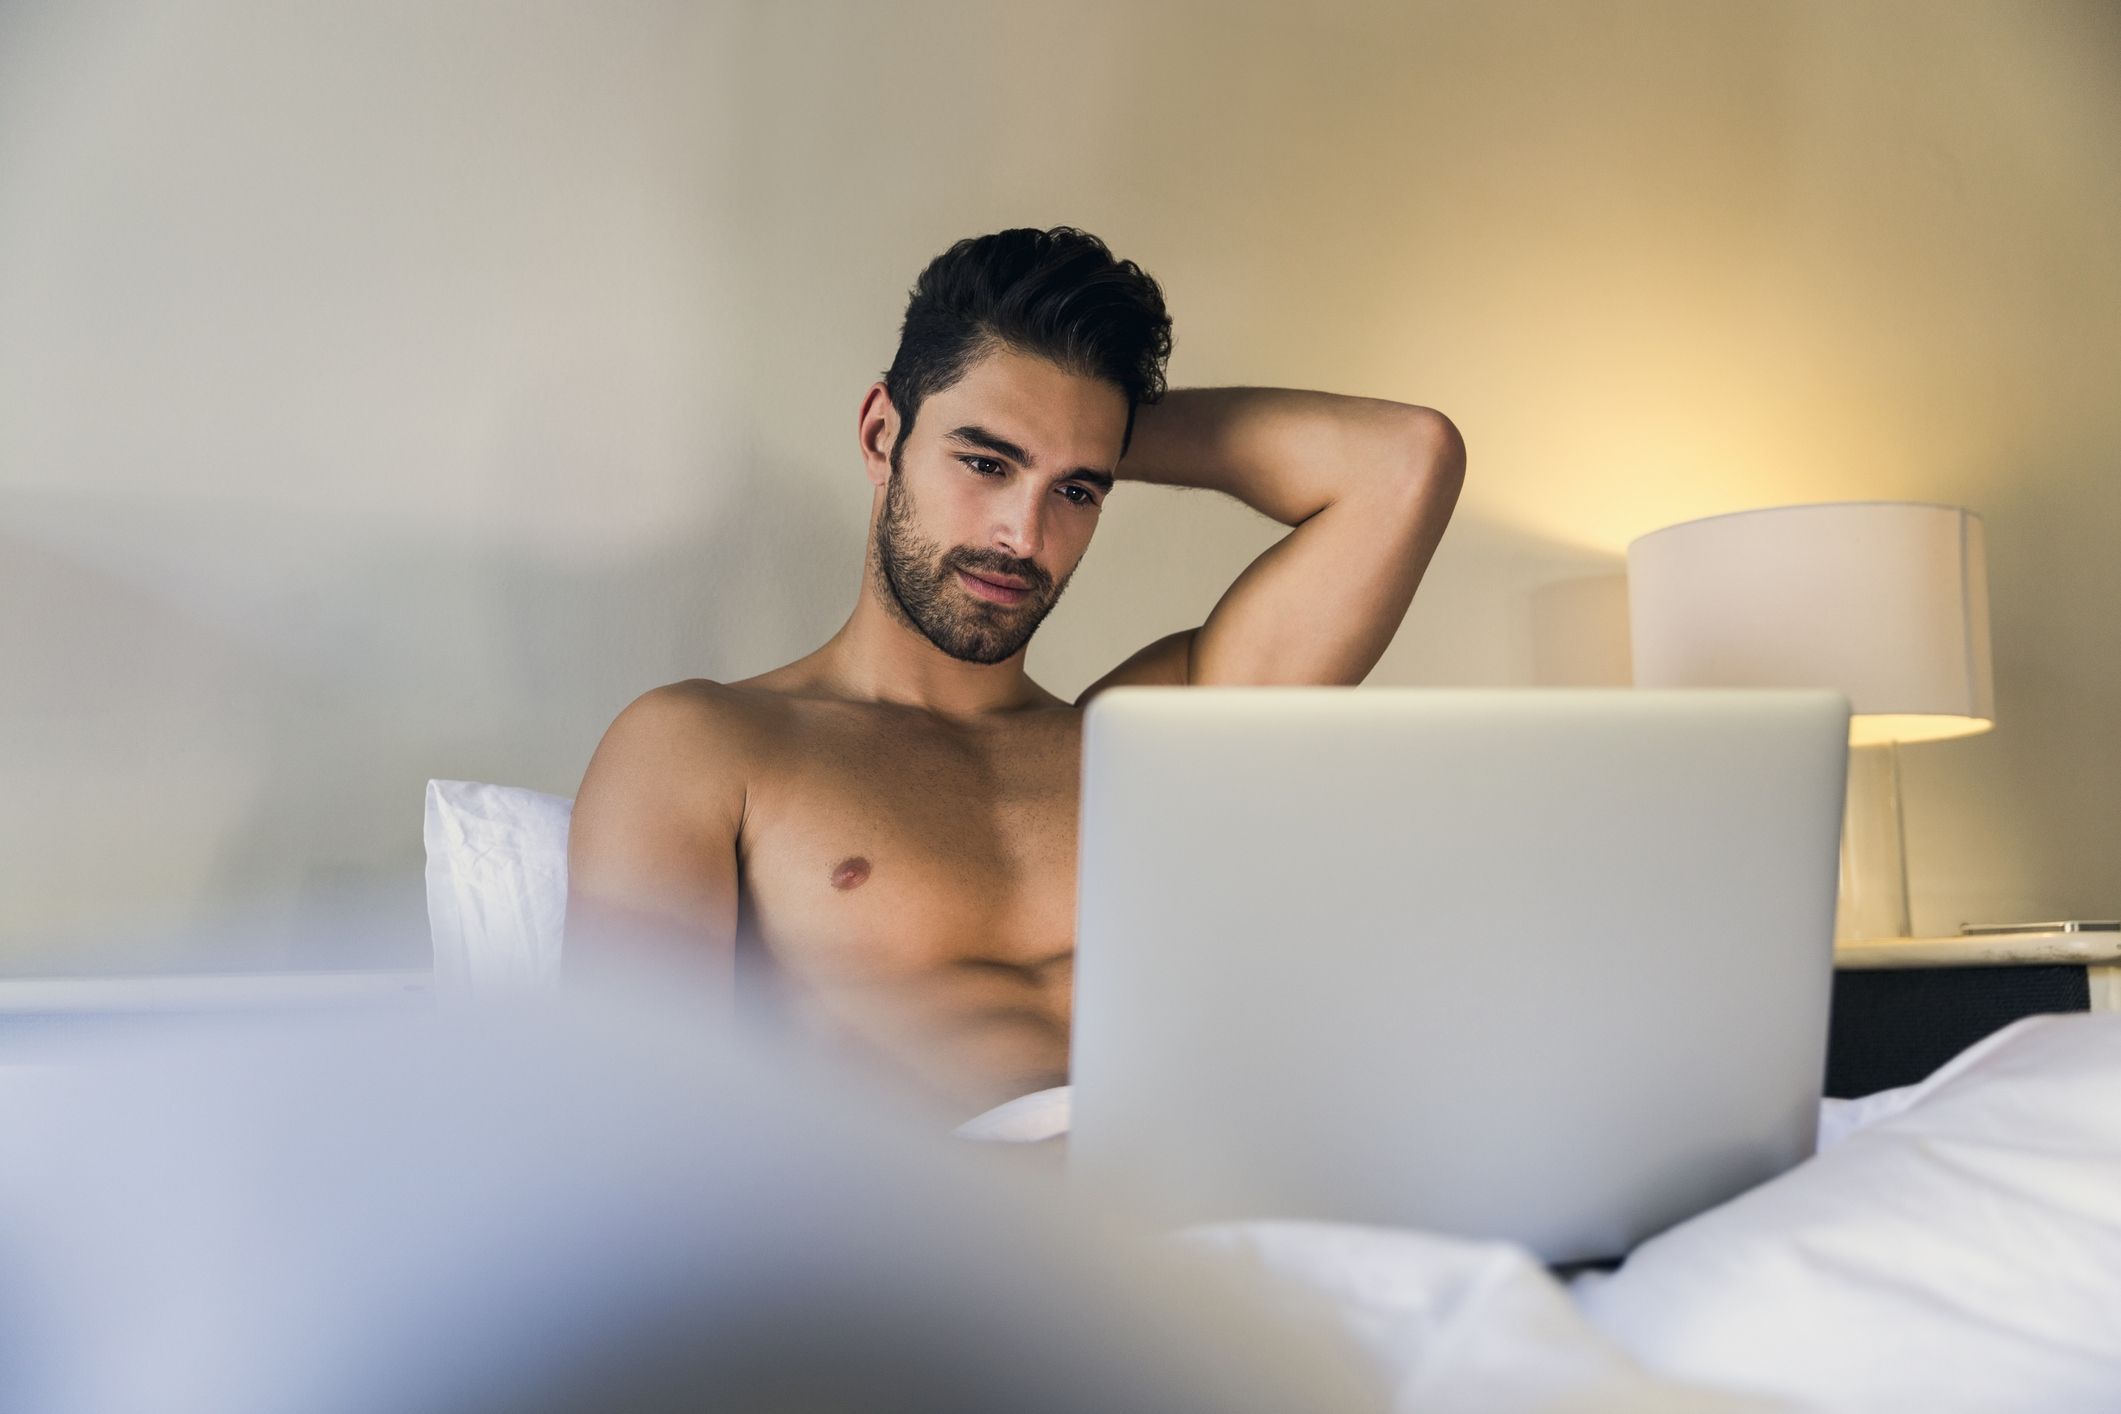 Bp Sexy Video Software - How to Browse Porn Sites Safely Without Getting Hacked